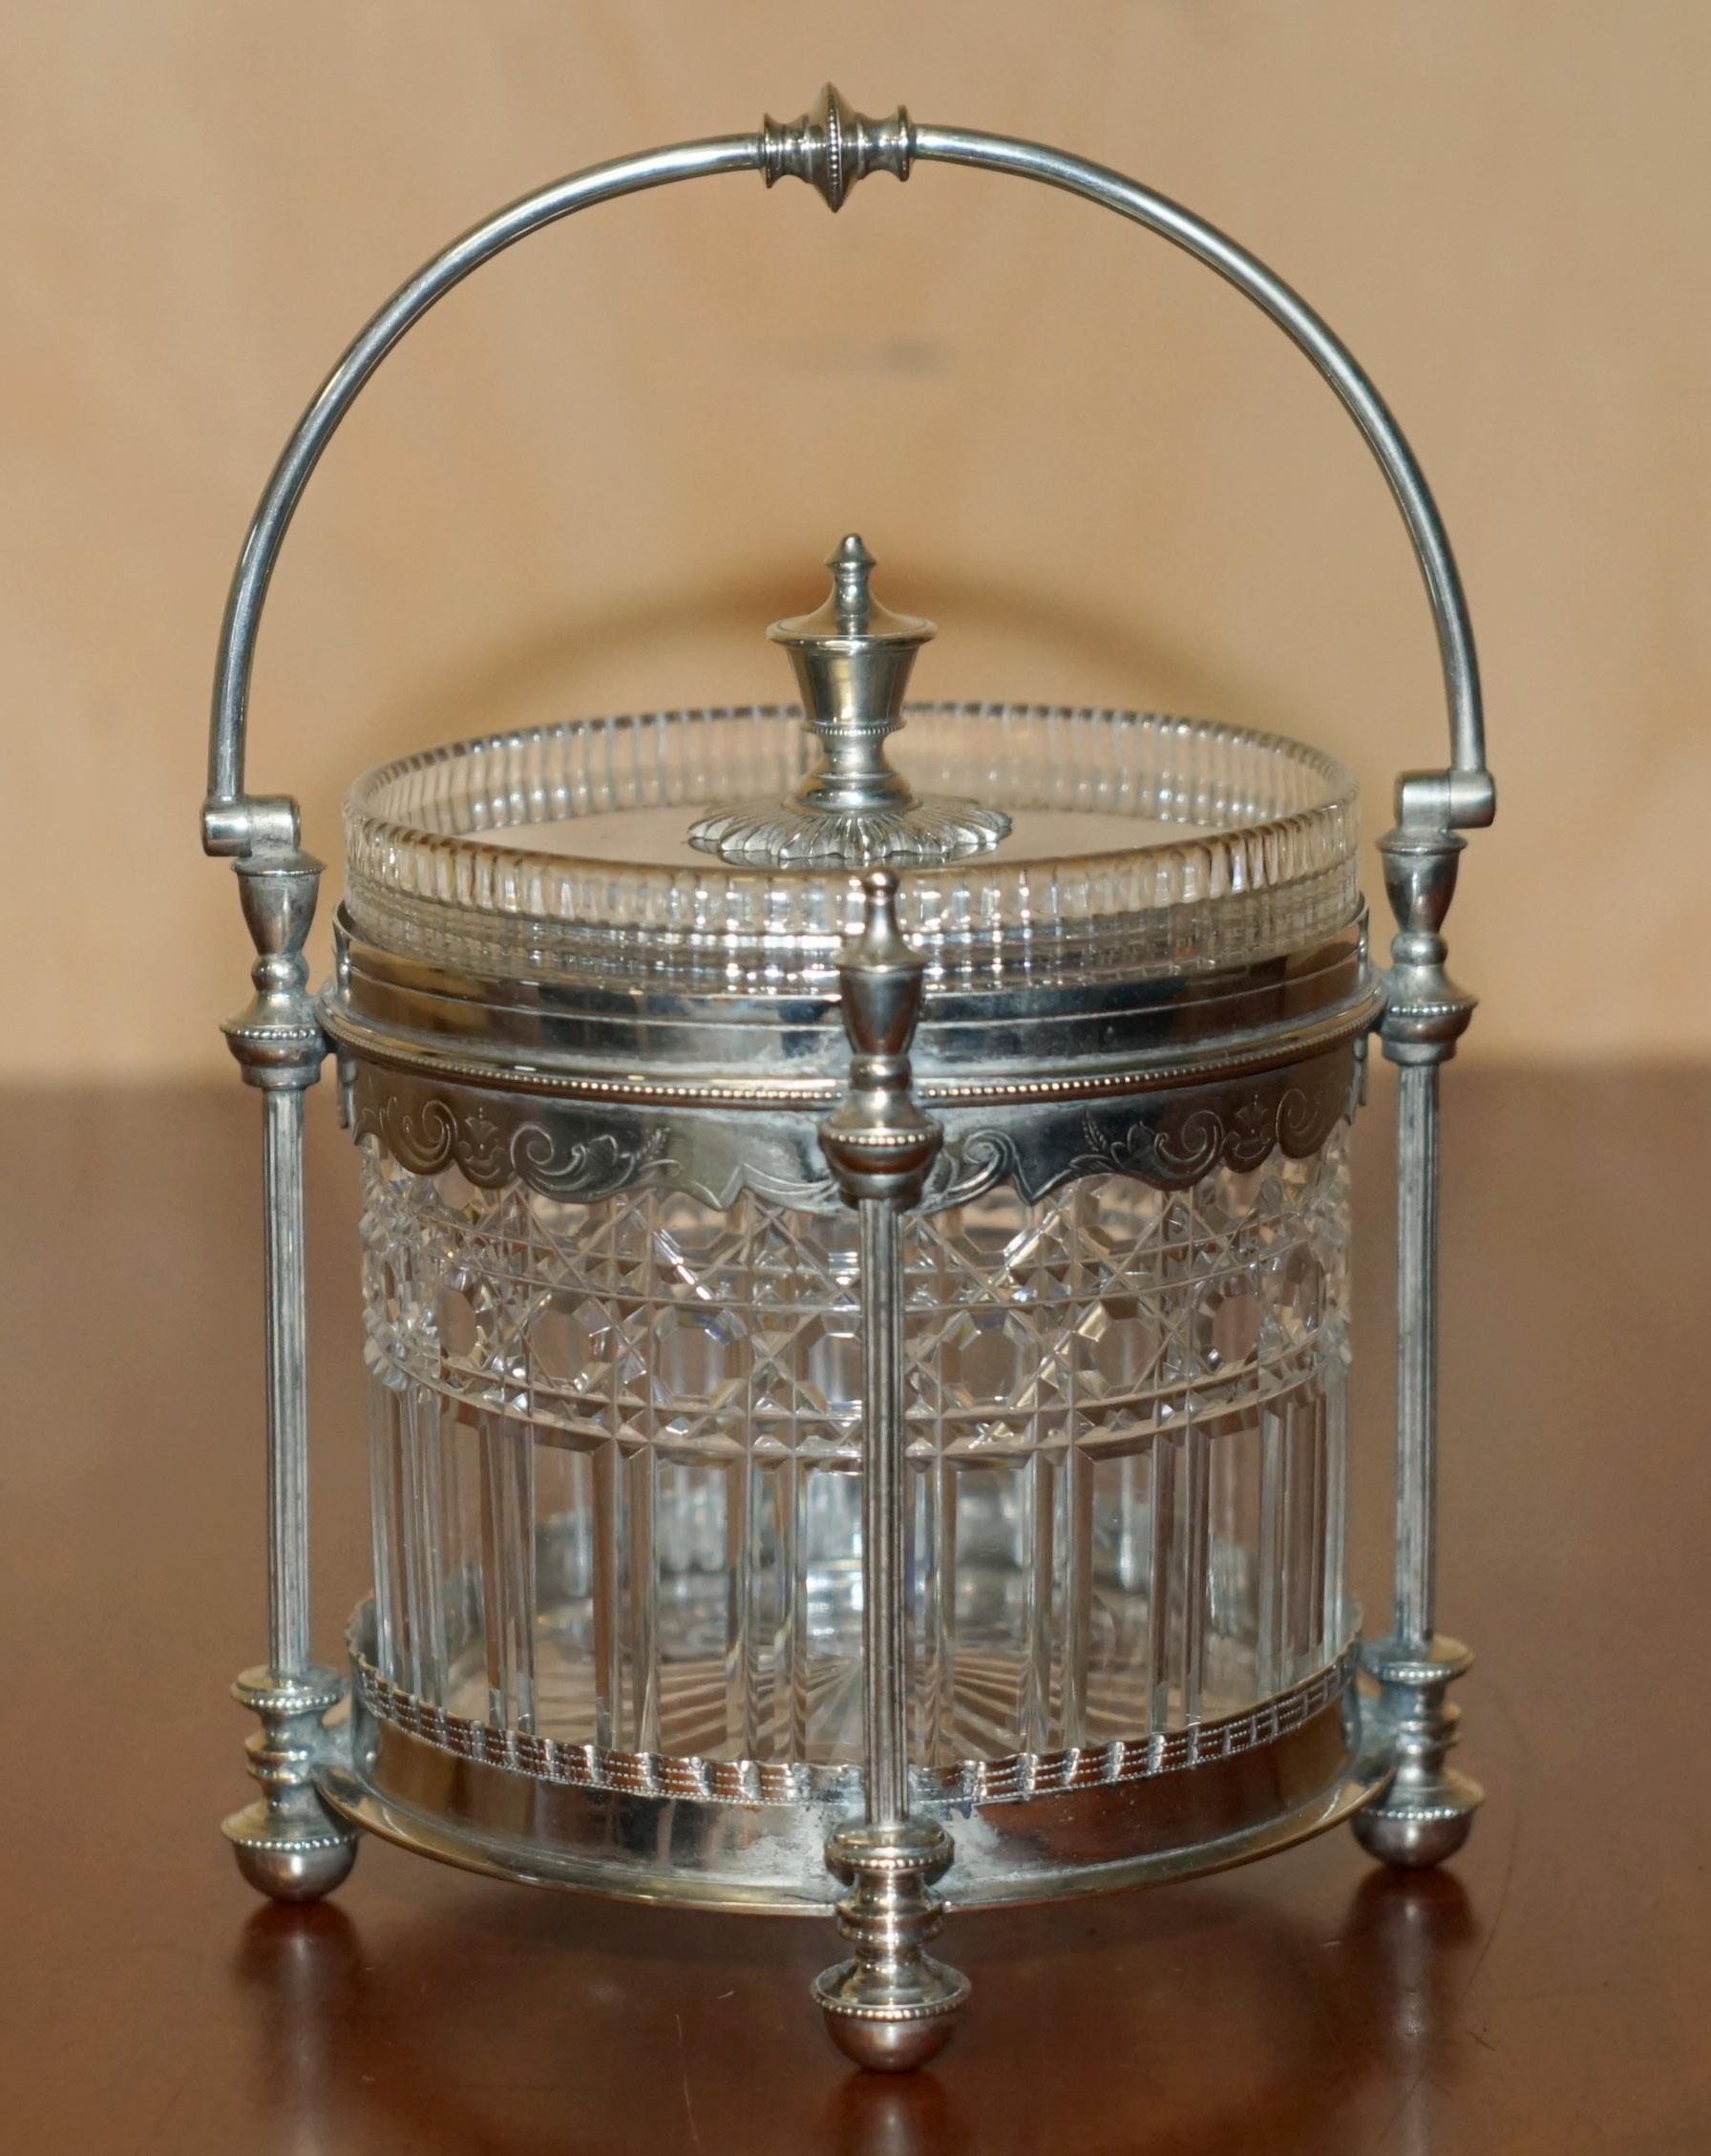 Royal House Antiques

Royal House Antiques is delighted to offer for sale this absolutely stunning original circa 1860-1870 Silver plated cut glass Crystal biscuit barrel jar

What a sublime find, it is truly stunning, I love this piece from every